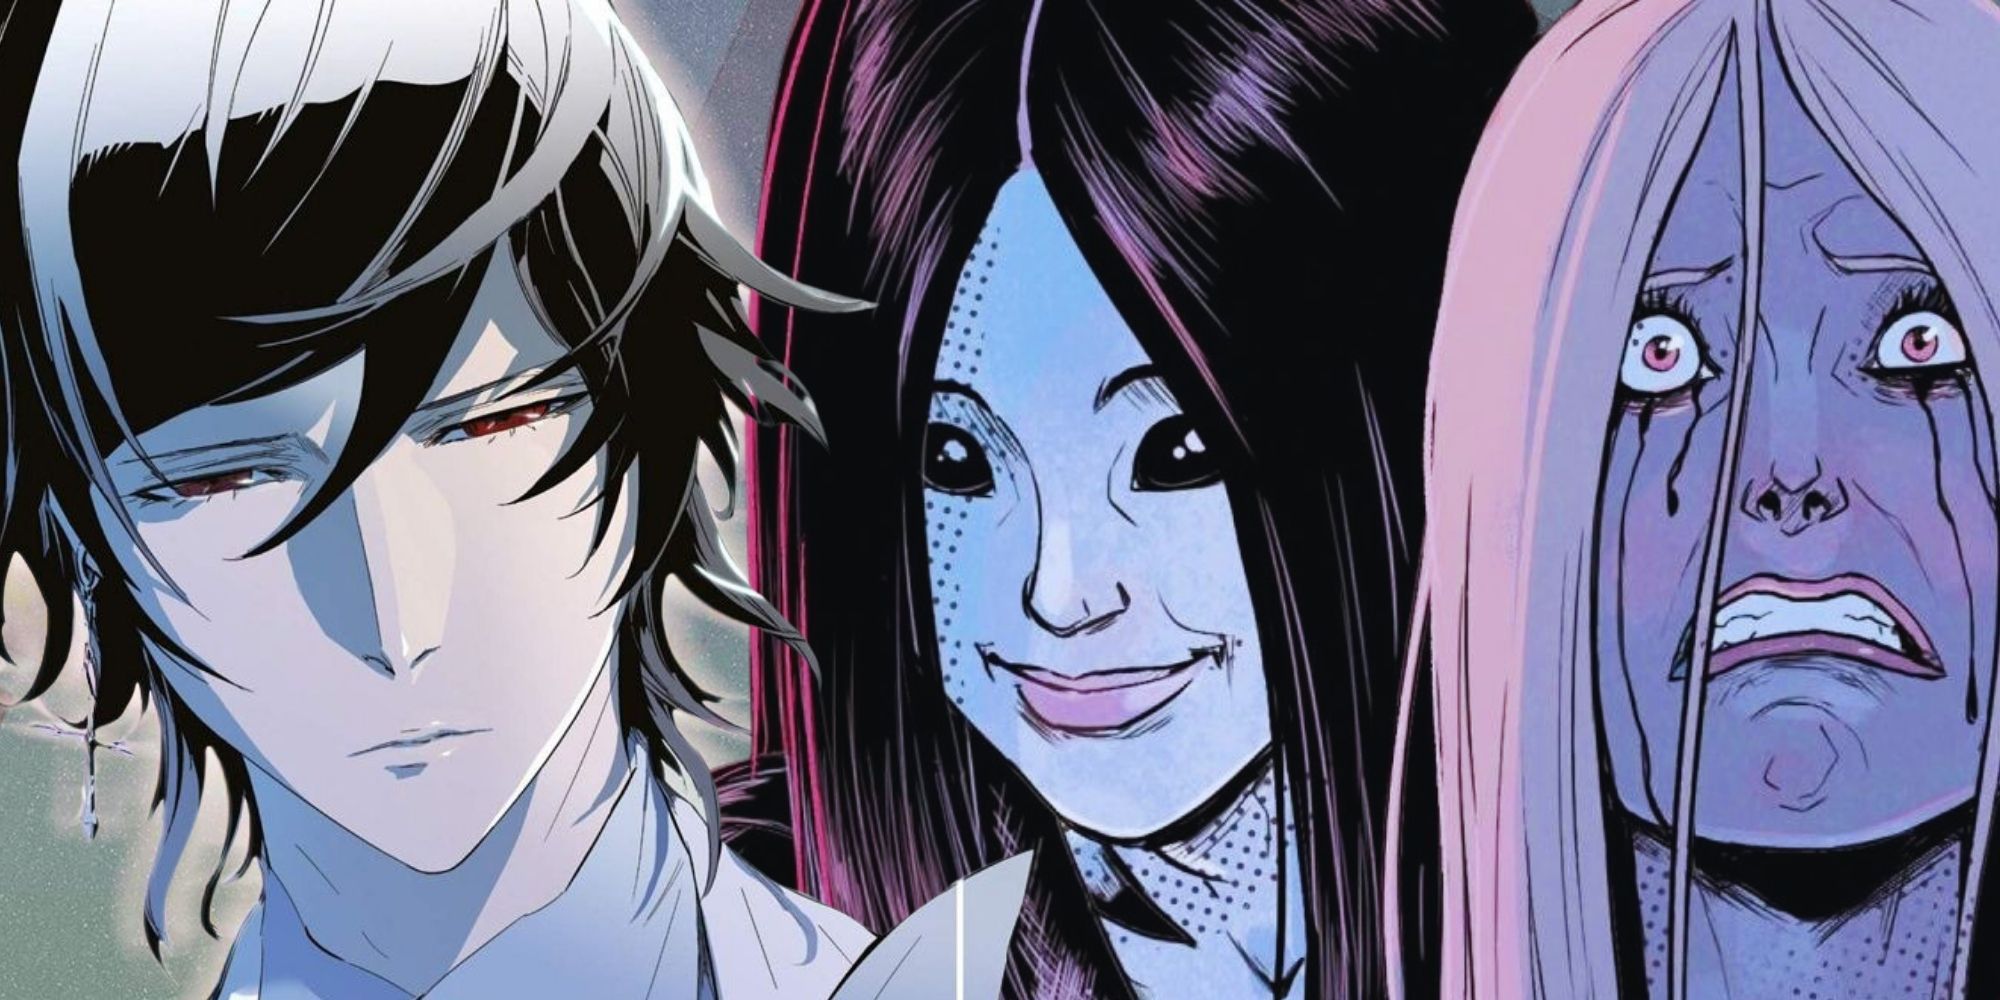 A collage of webtoons art from Witch Creek Road and Noblesse